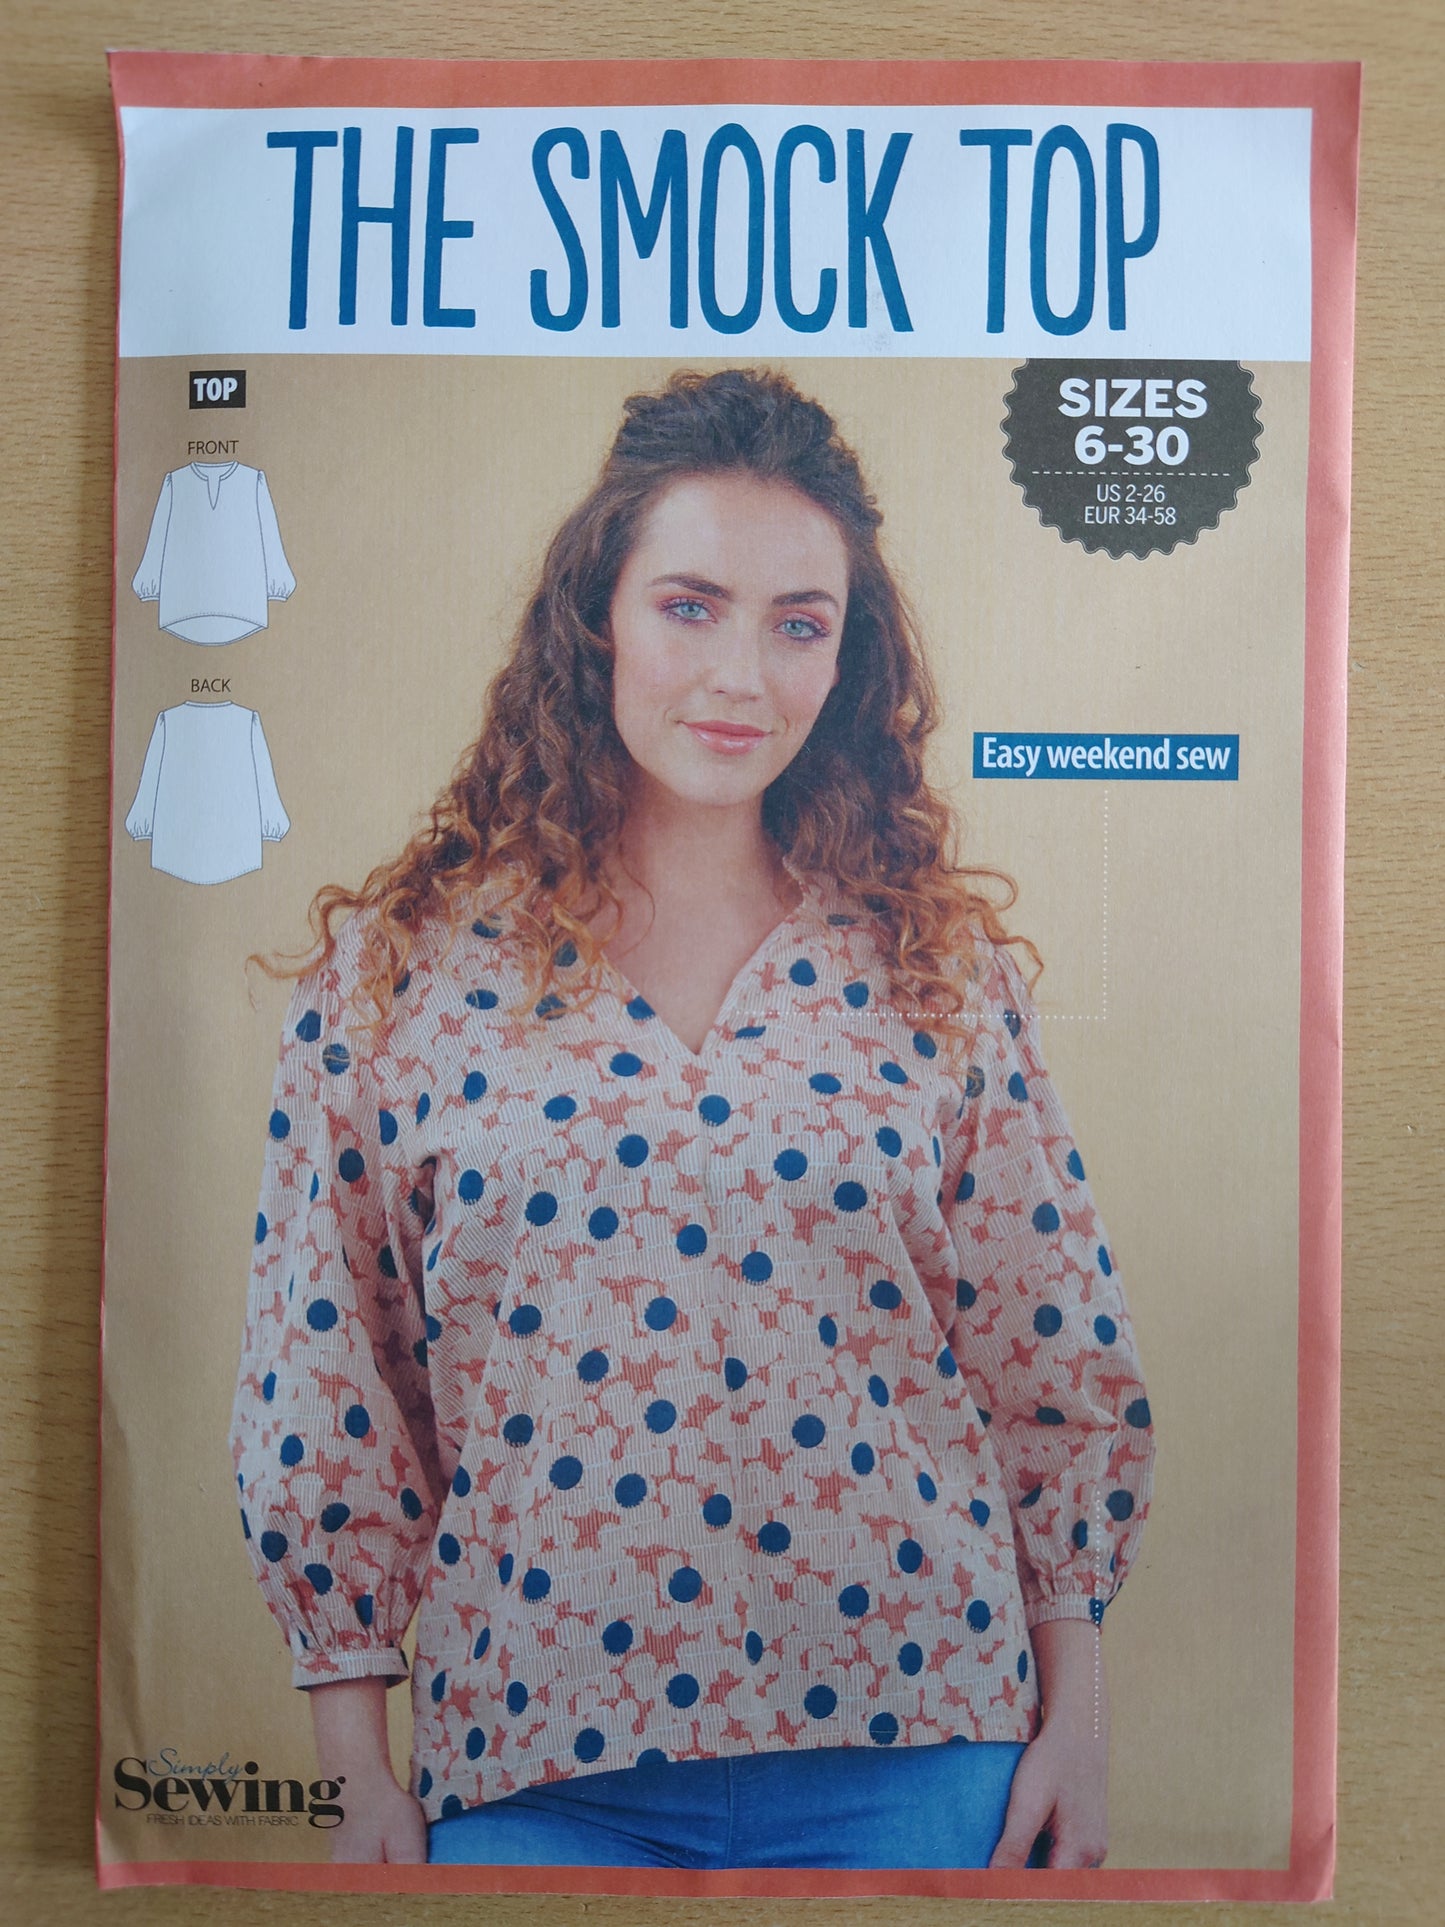 The Smock Top